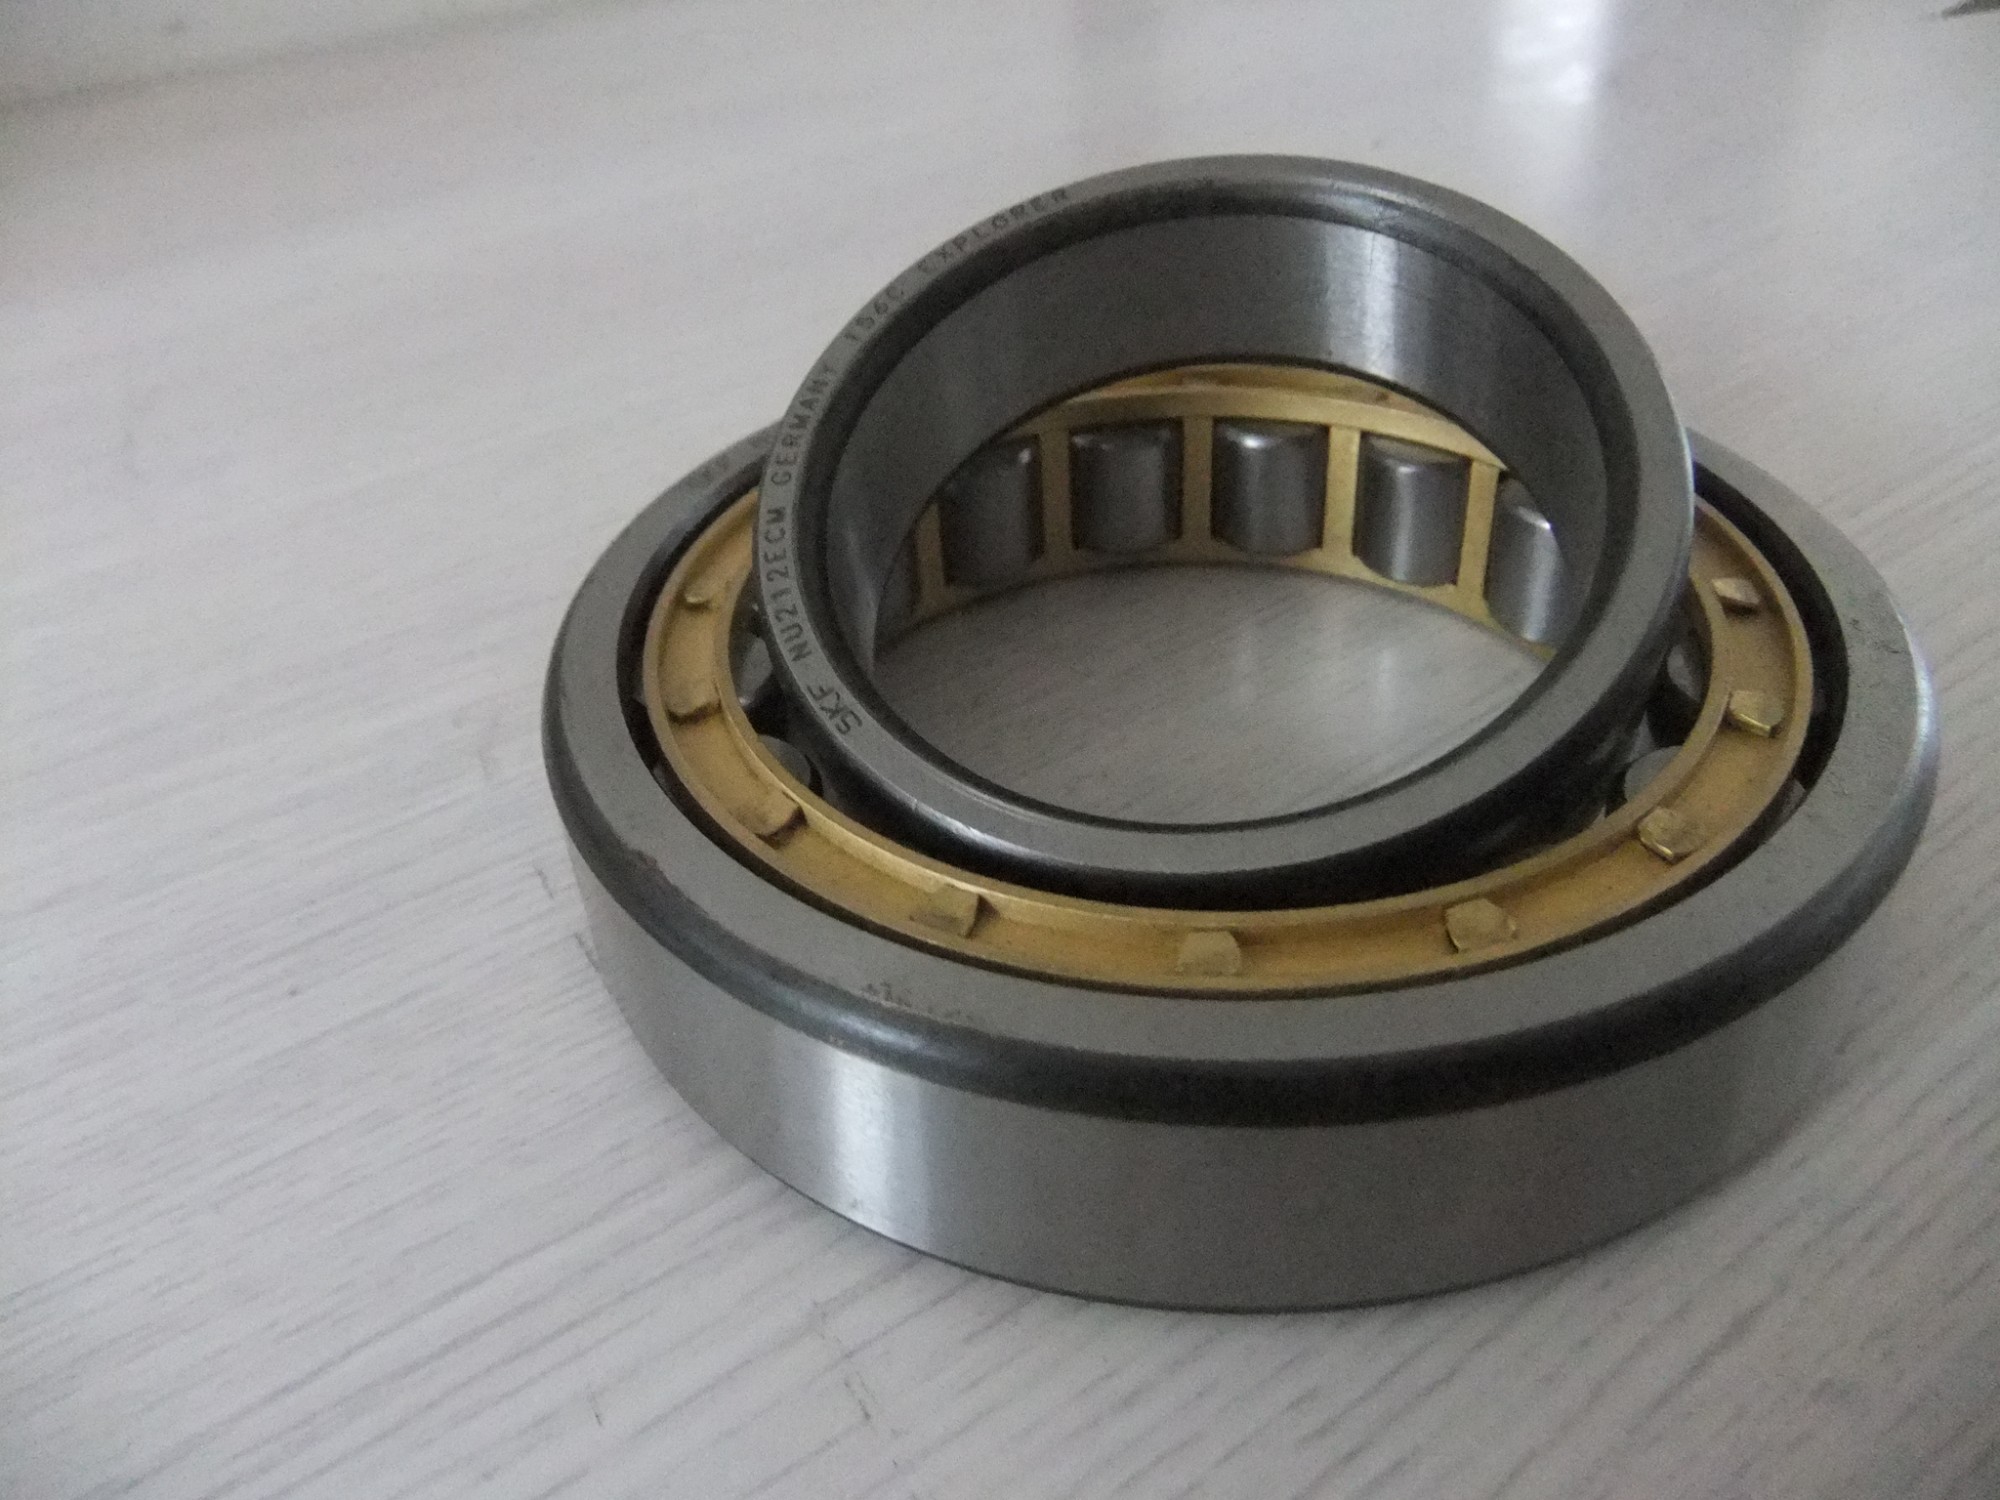 Double Row Cylindrical Roller Bearing NU214 Manufacturers, Double Row Cylindrical Roller Bearing NU214 Factory, Supply Double Row Cylindrical Roller Bearing NU214